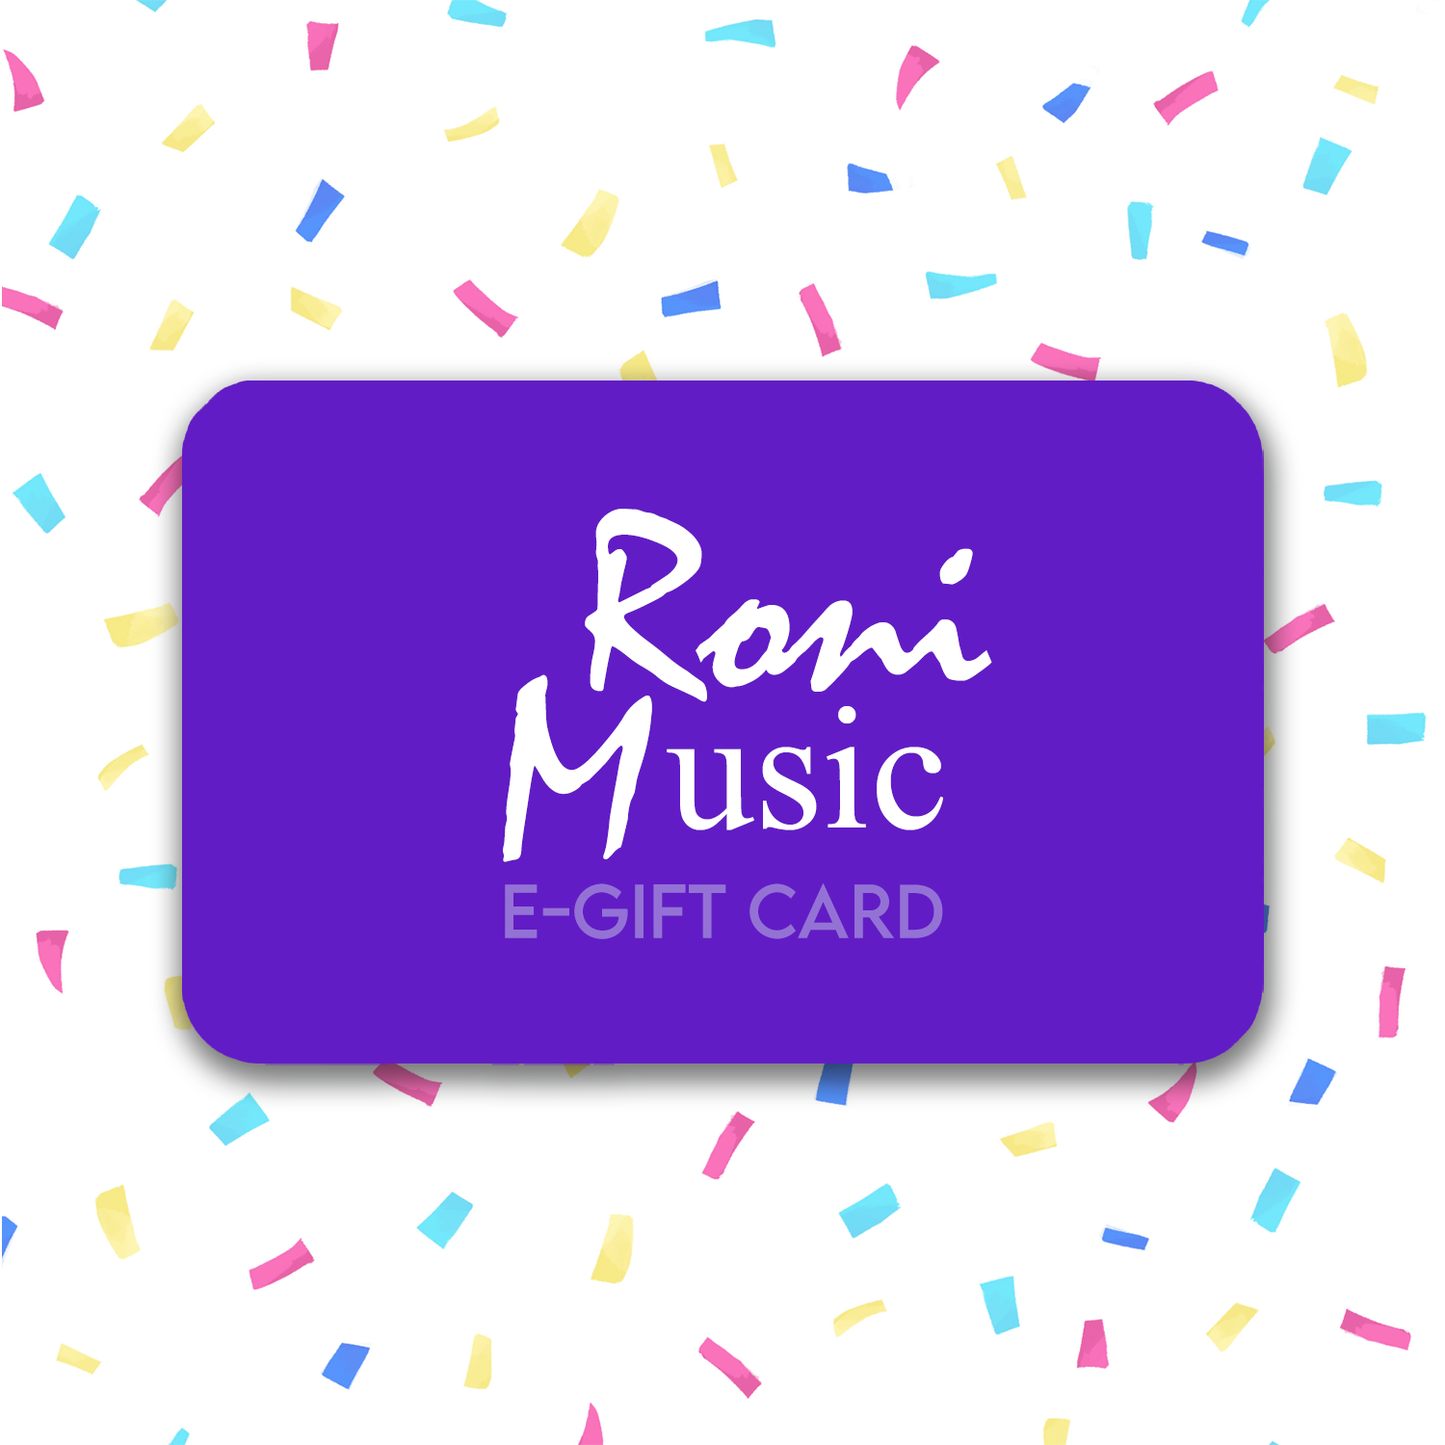 Roni Music E-Gift Card The Best Musical Gift